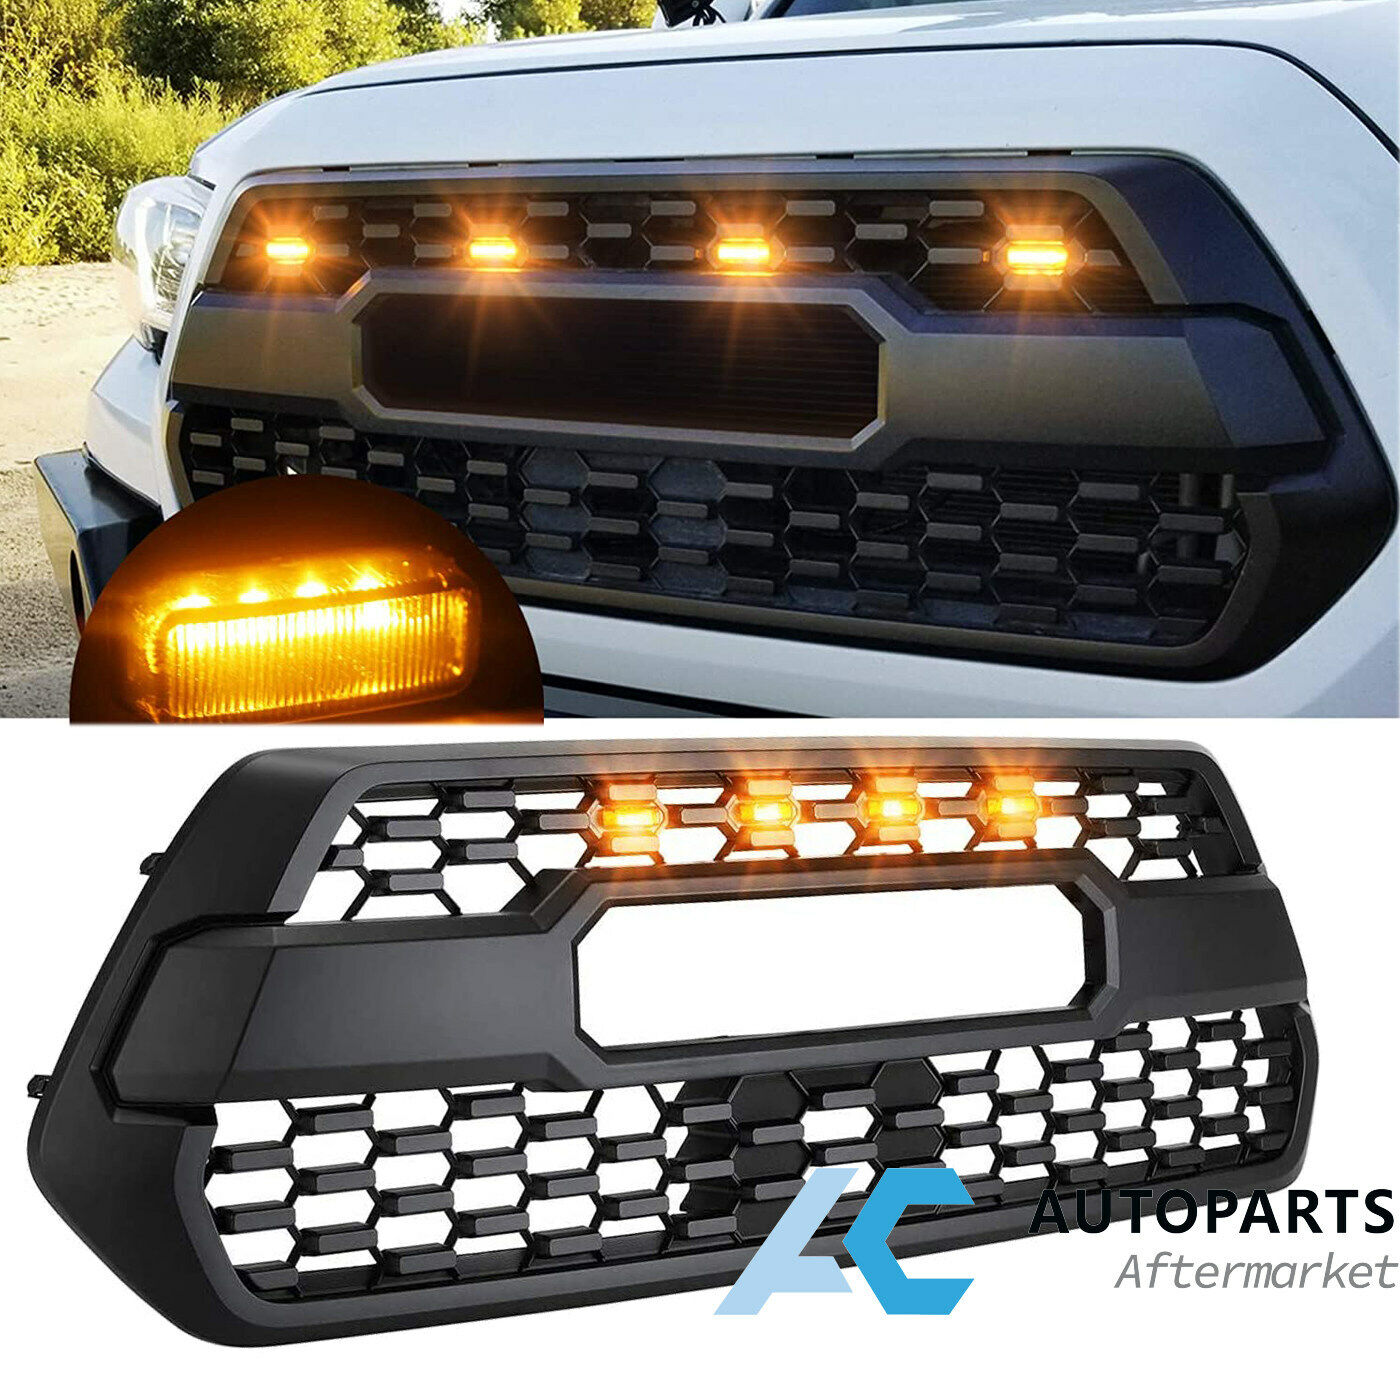 Front Grill Bumper Hood Grille for 2016-20 Tacoma TRD PRO w/ Letter LED Light